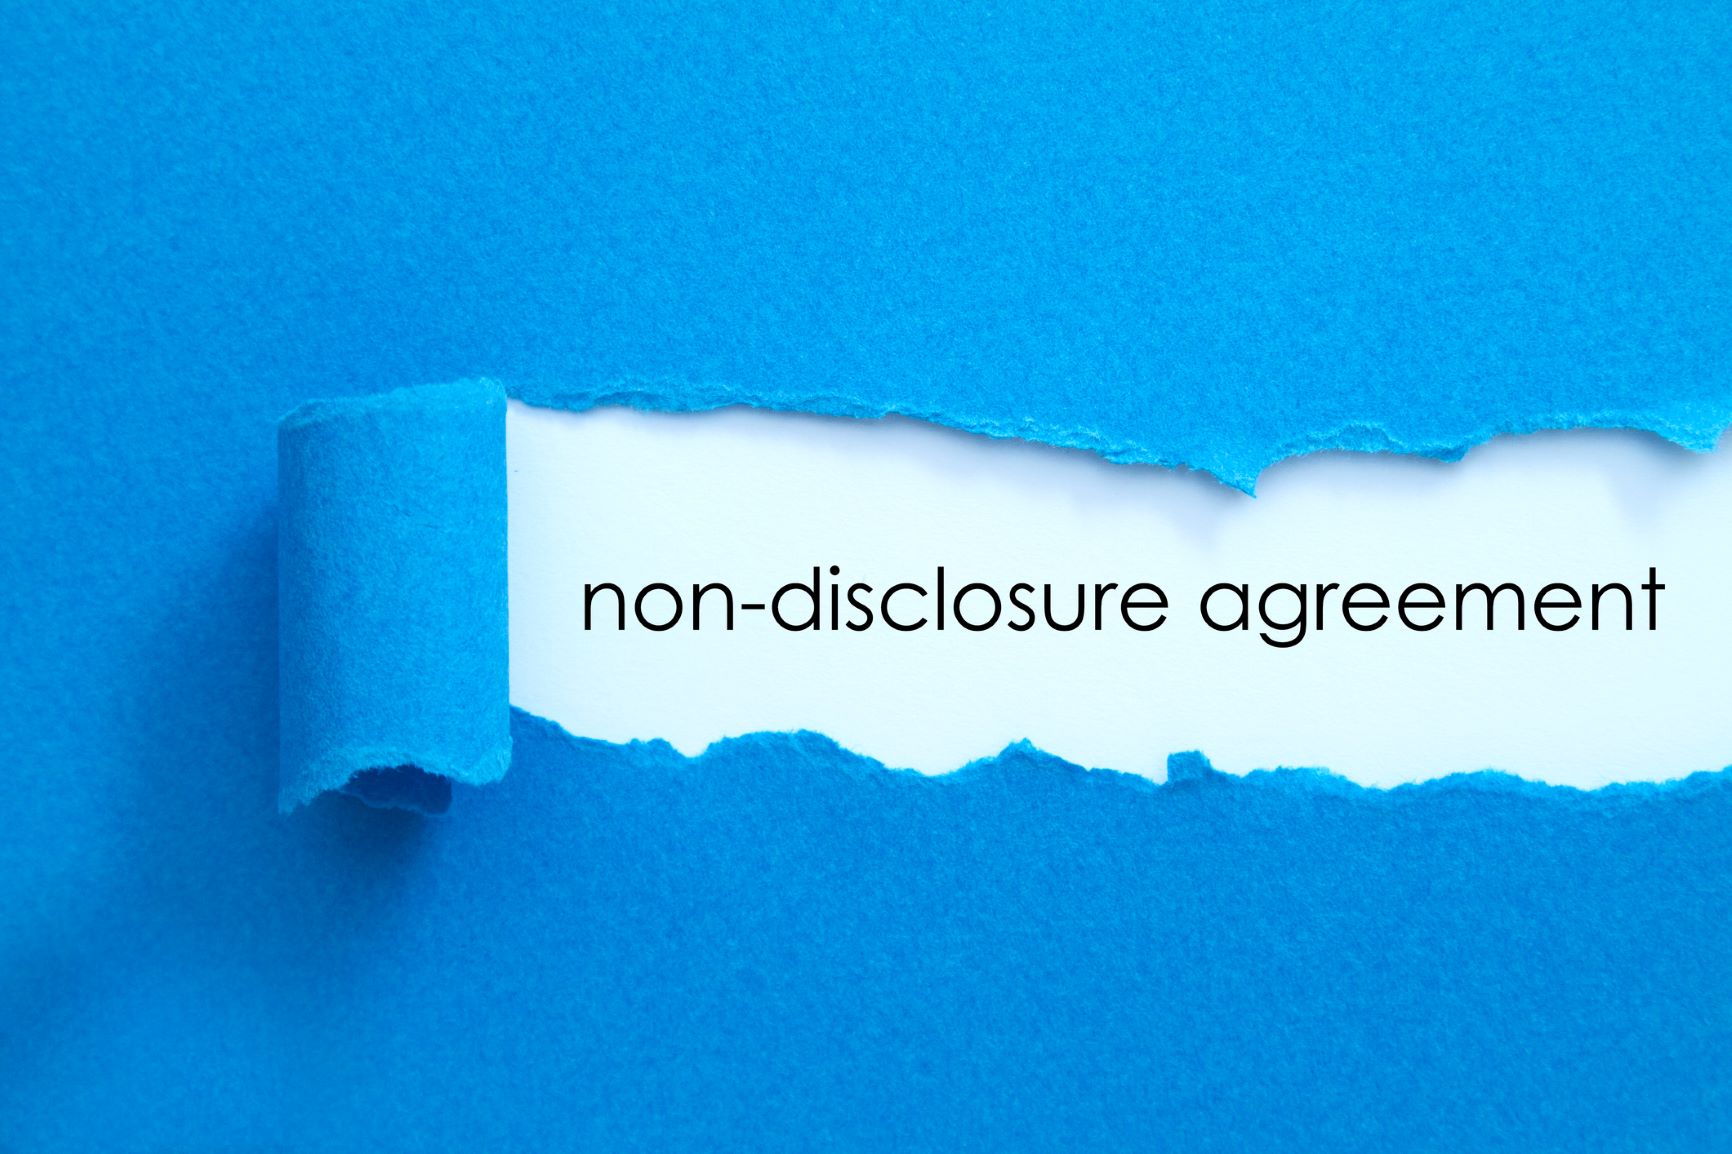 Paper torn to reveal the words 'non-disclosure agreement'